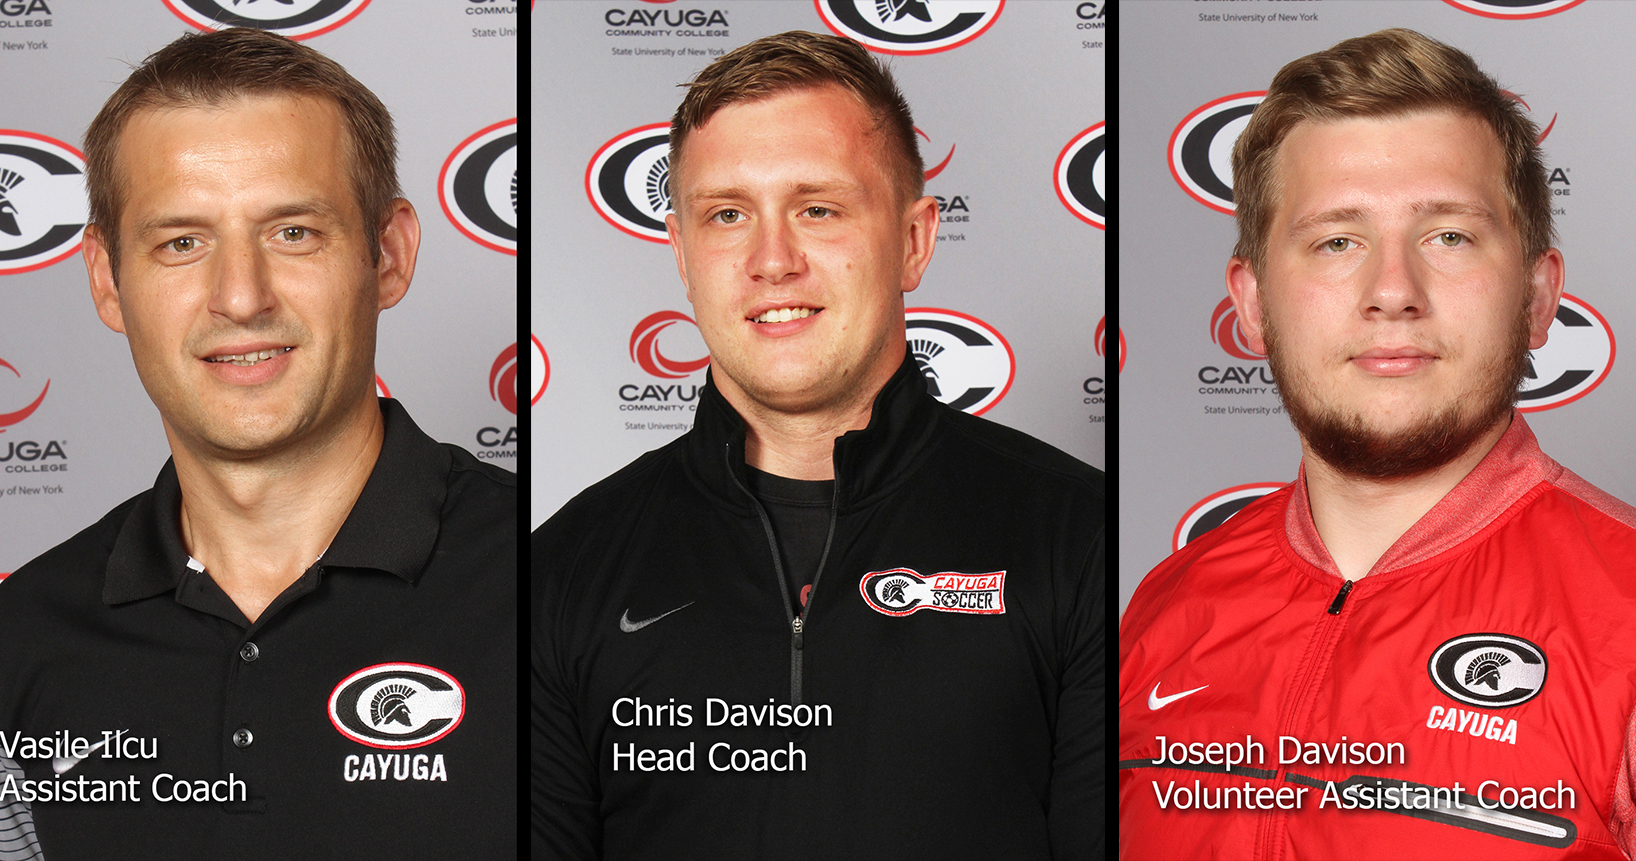 Coaches of the Cayuga Community College Men's Soccer Team, led by Coach Chris Davison, received the United Soccer Coaches Association Junior College Men’s Regional Staff of the Year award.